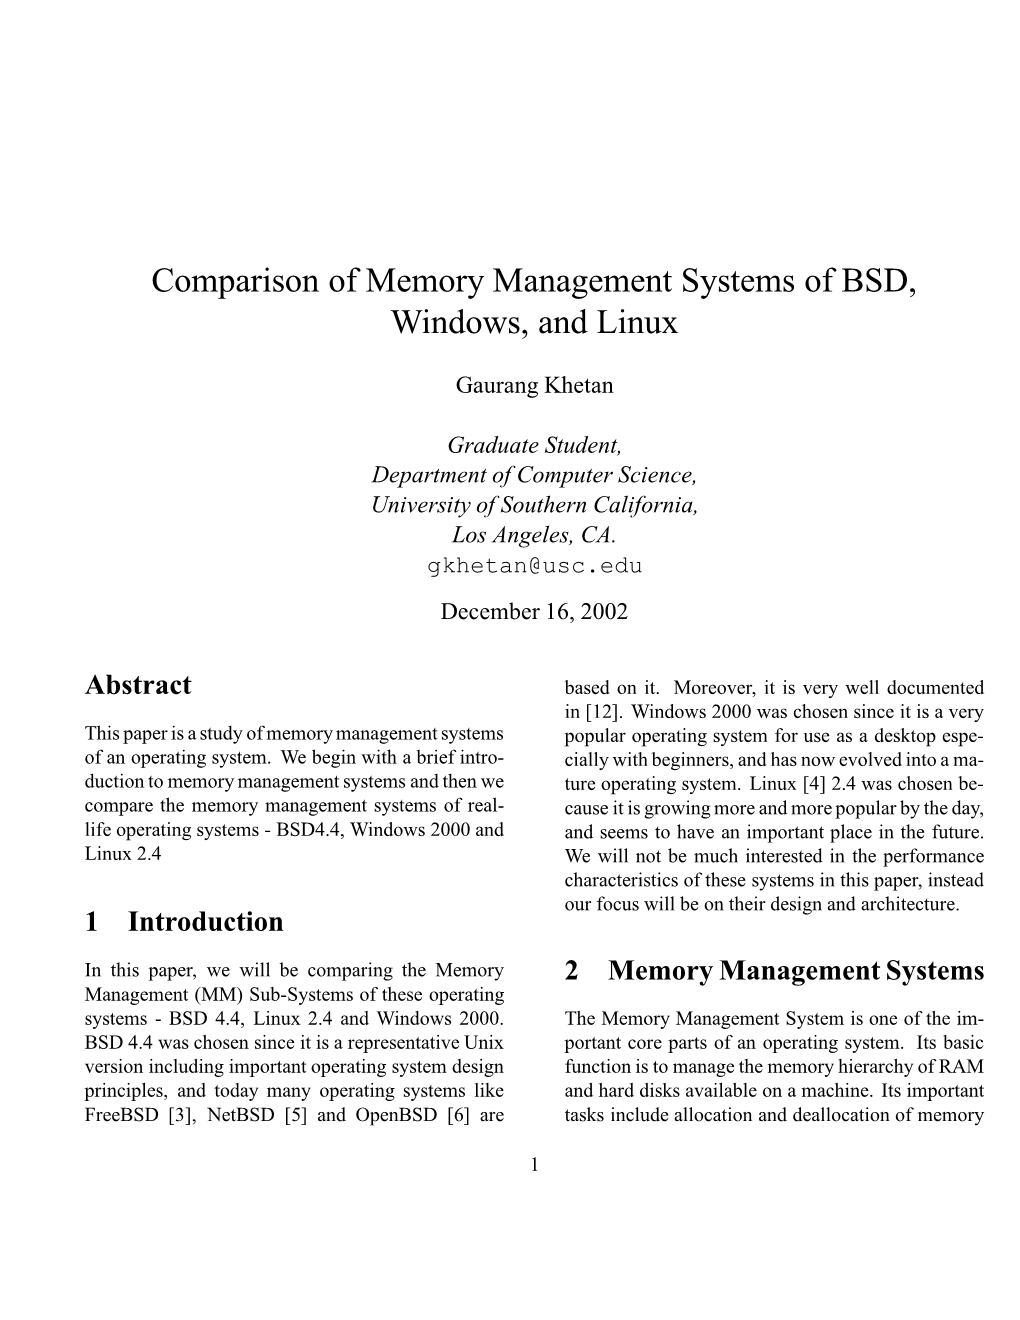 Comparison of Memory Management Systems of BSD, Windows, and Linux